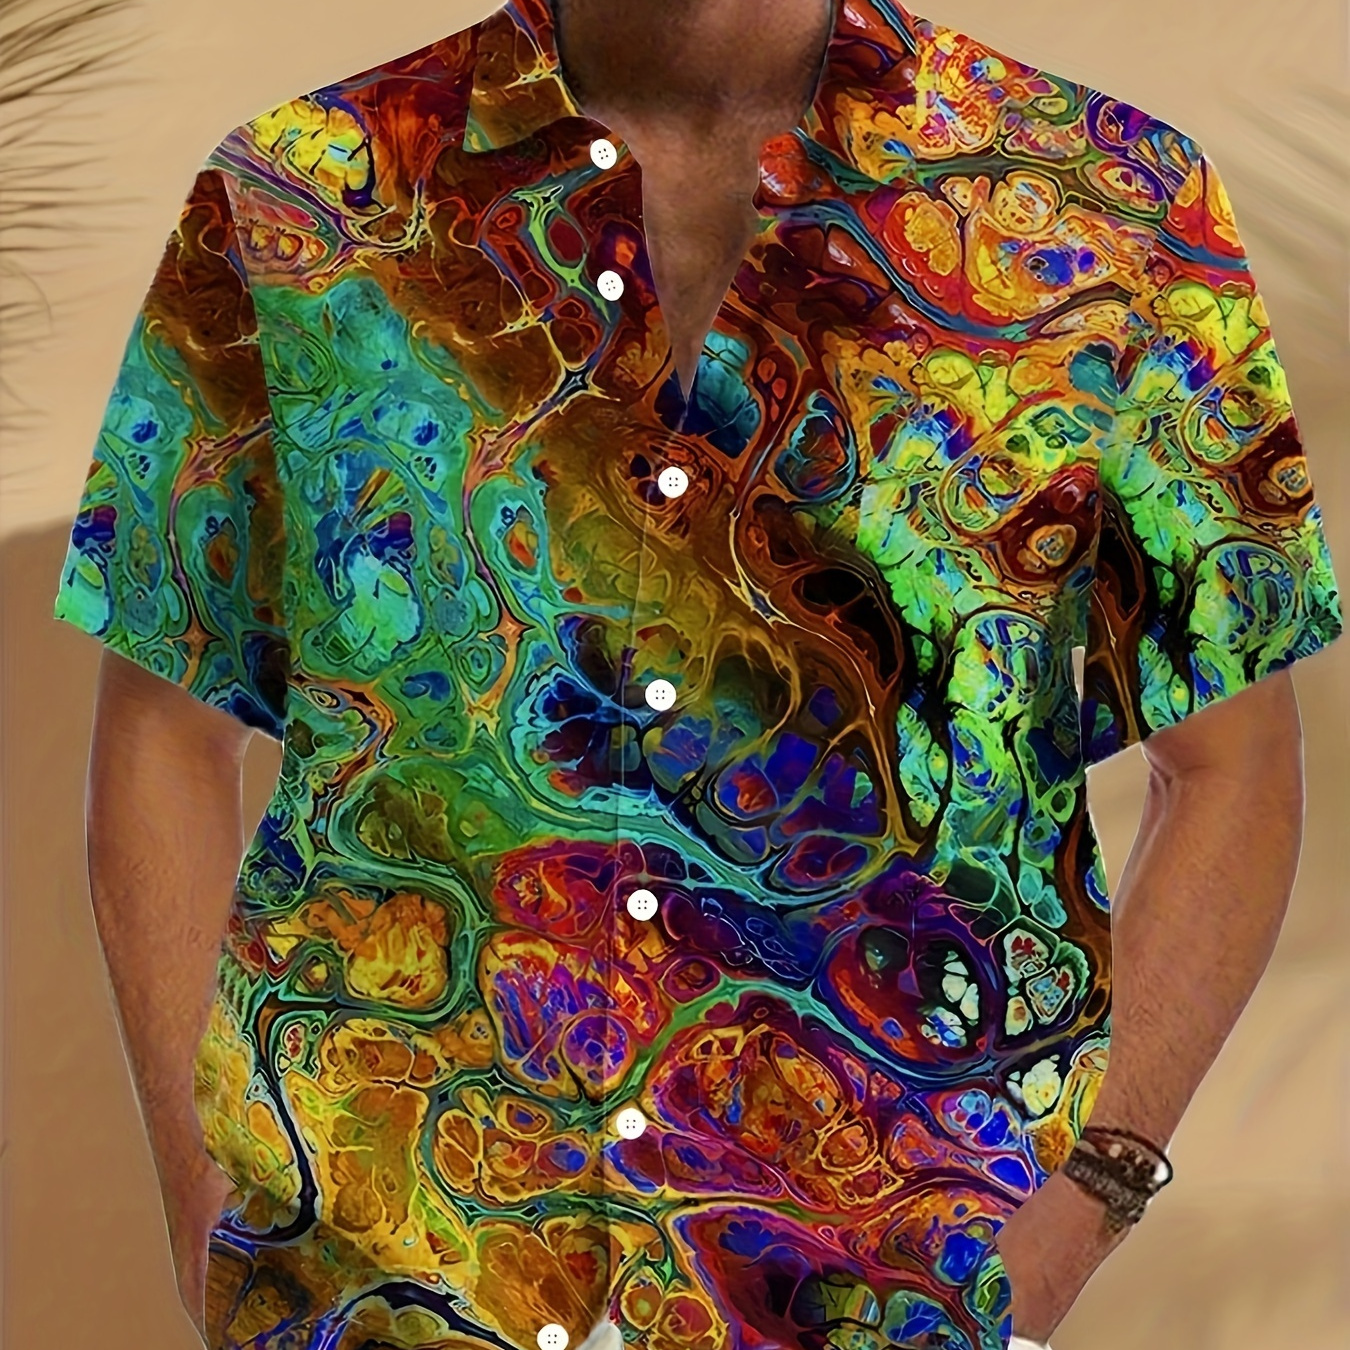 

Colorful Print, Men's Button Up Short Sleeve Shirt For Summer